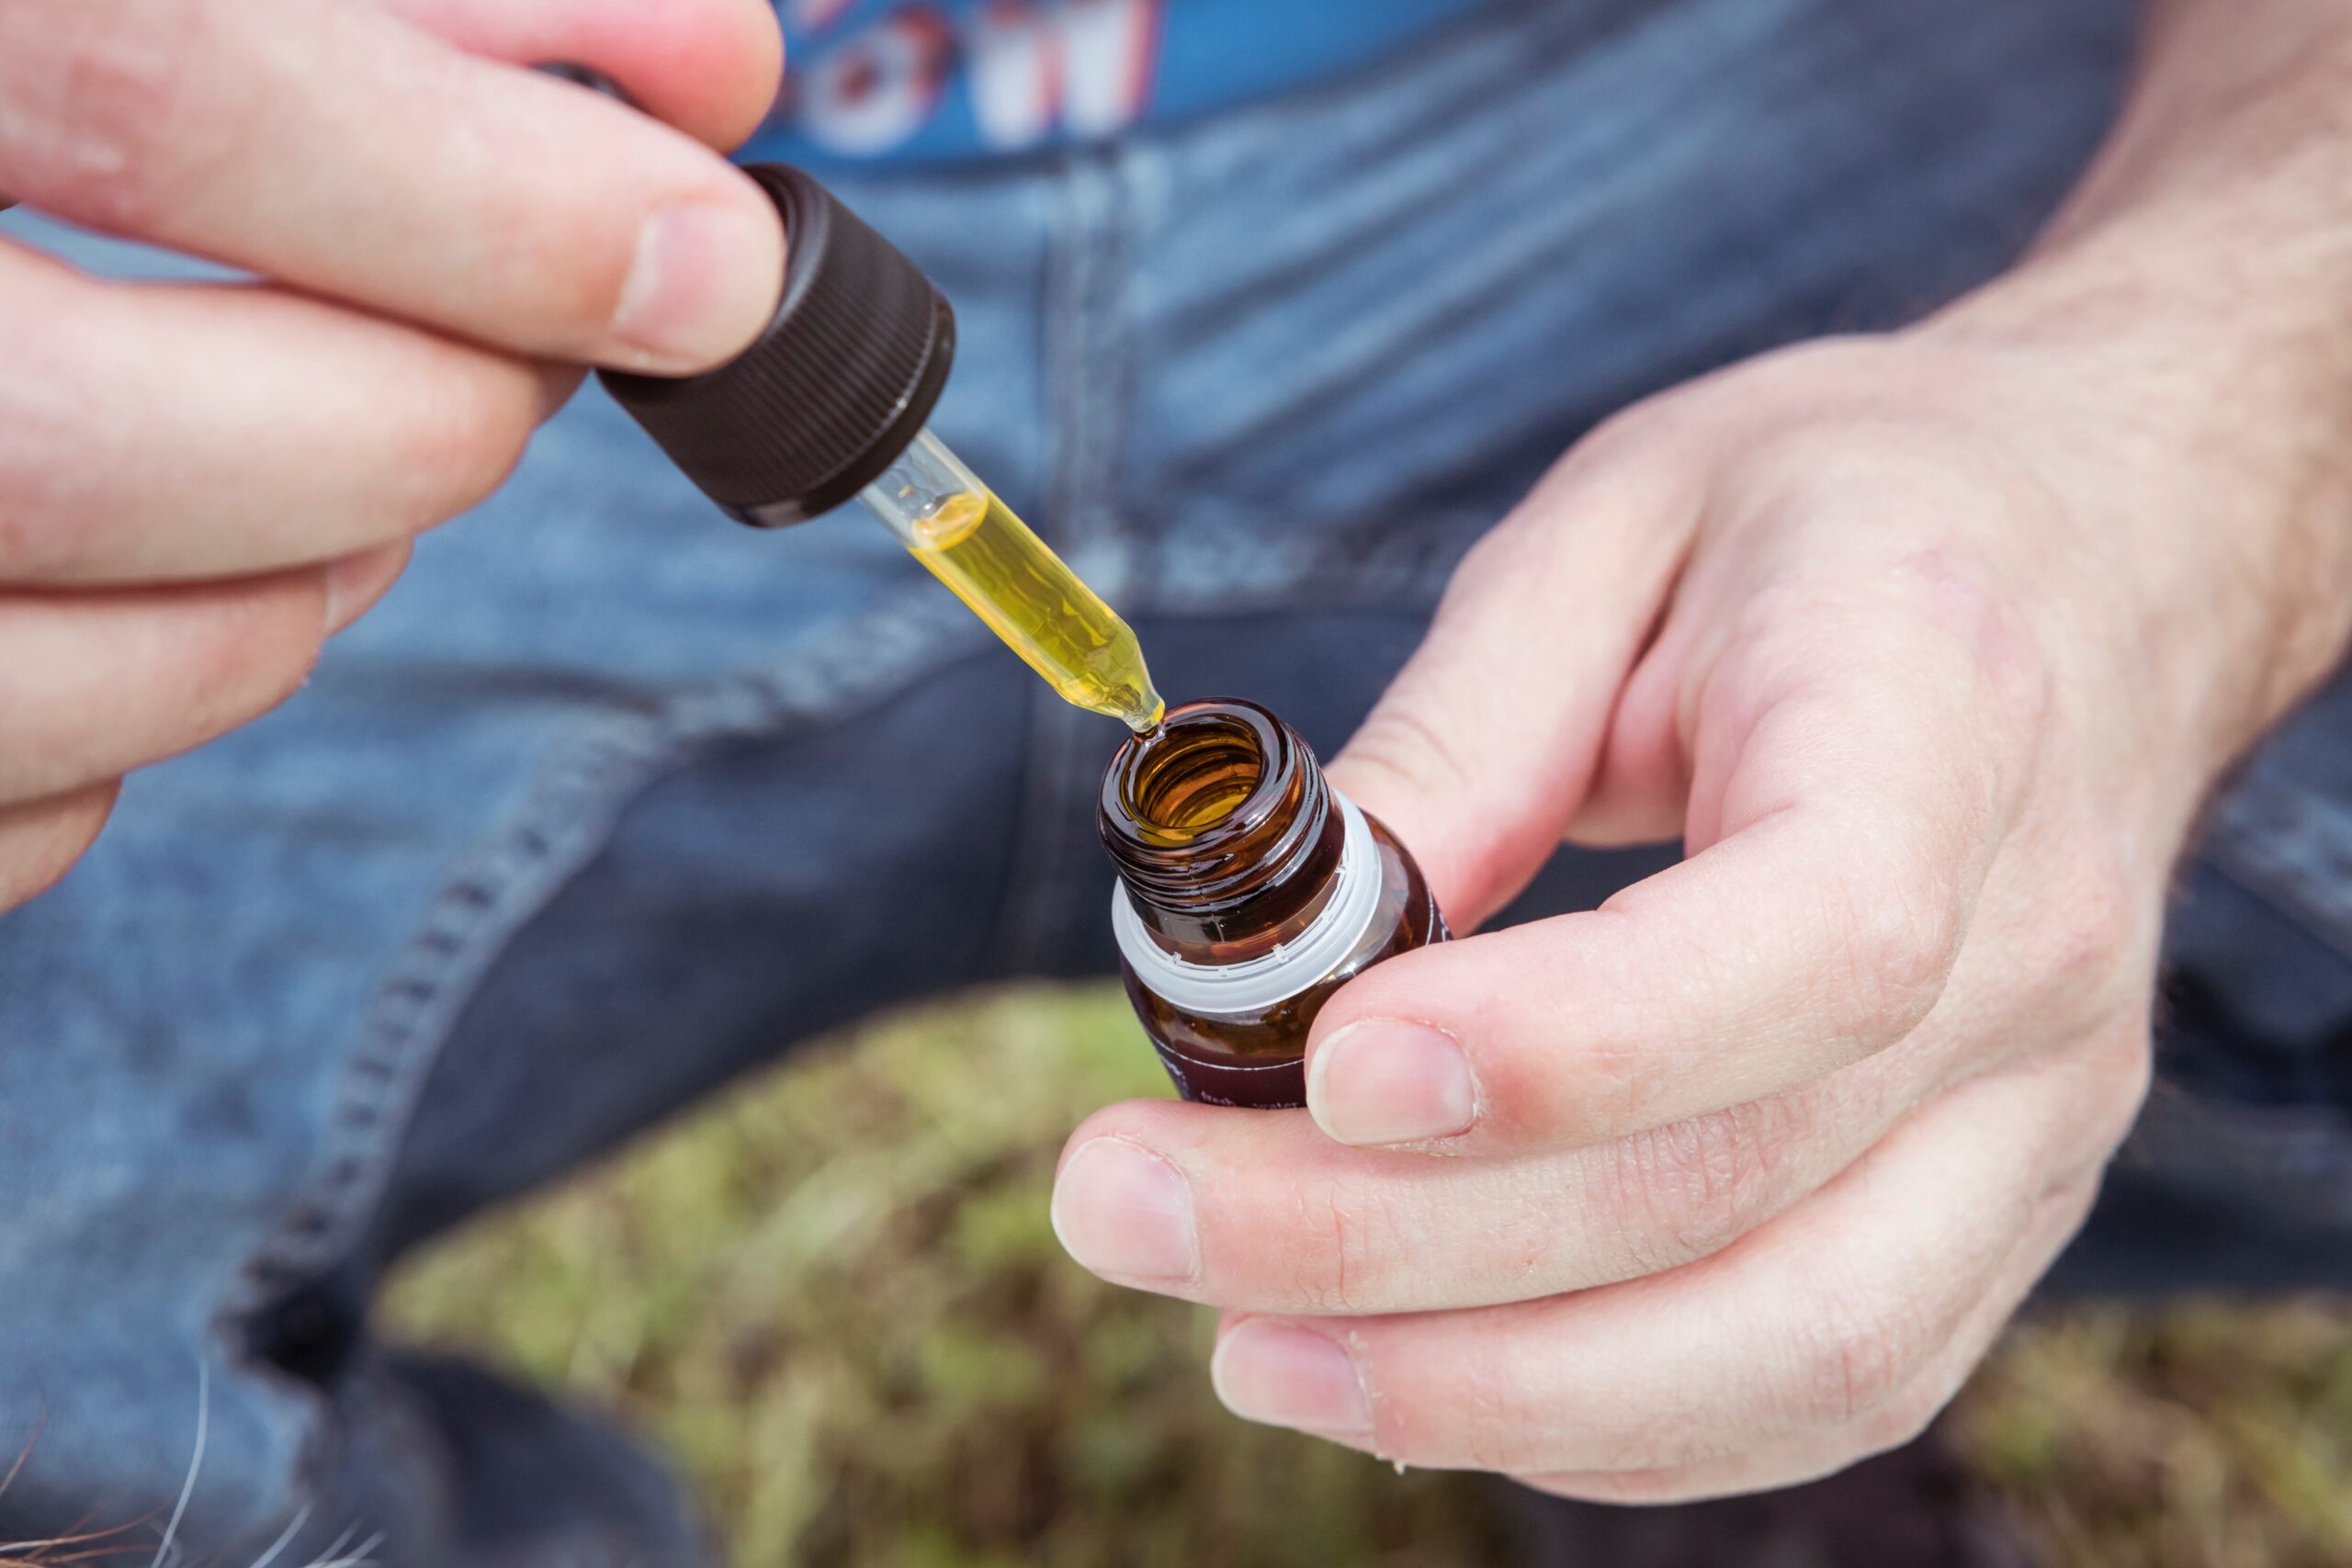 Finding The Right CBD Product For You